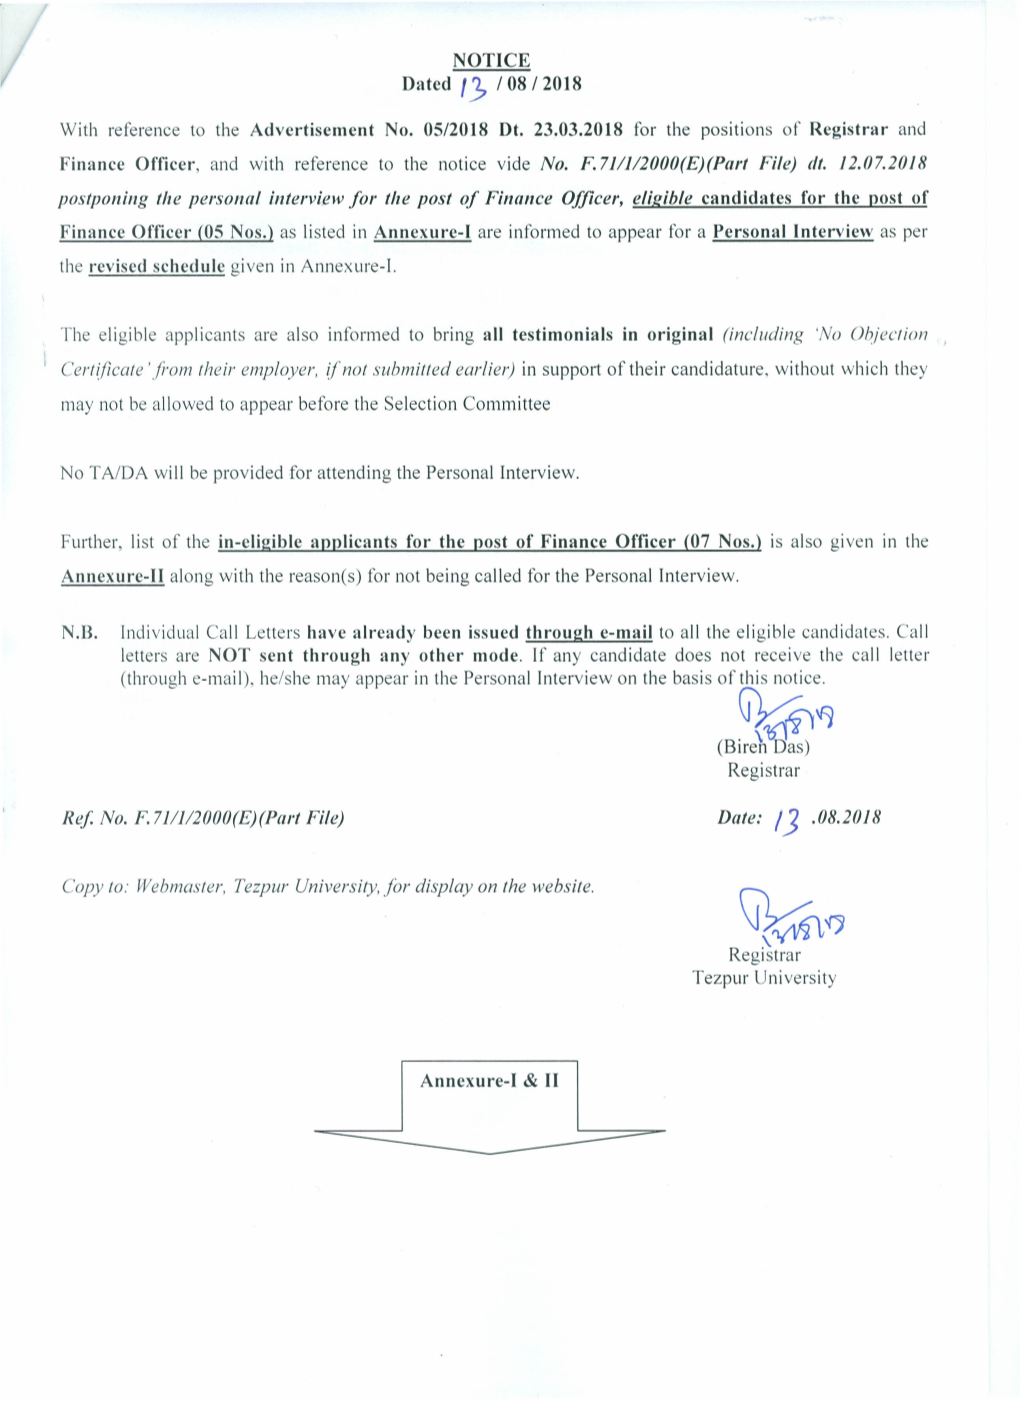 Dated I], 108/2018 Postponing the Personal Interview for the Post of Finance Officer, Eligible Candidates (Including 'No Objecti